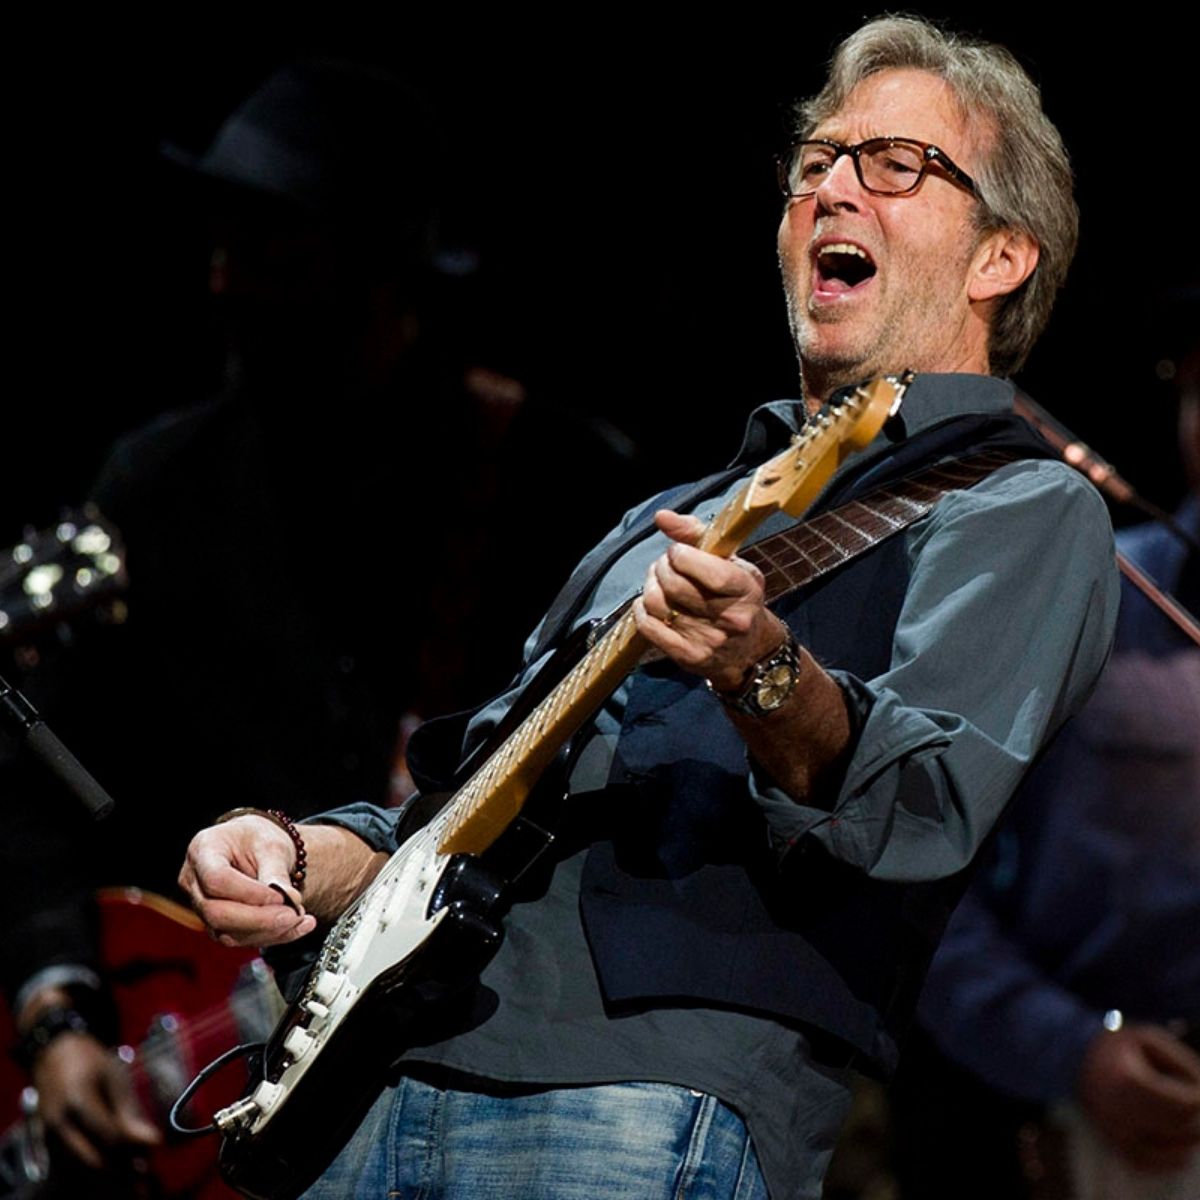 Eric Clapton at a recent performance